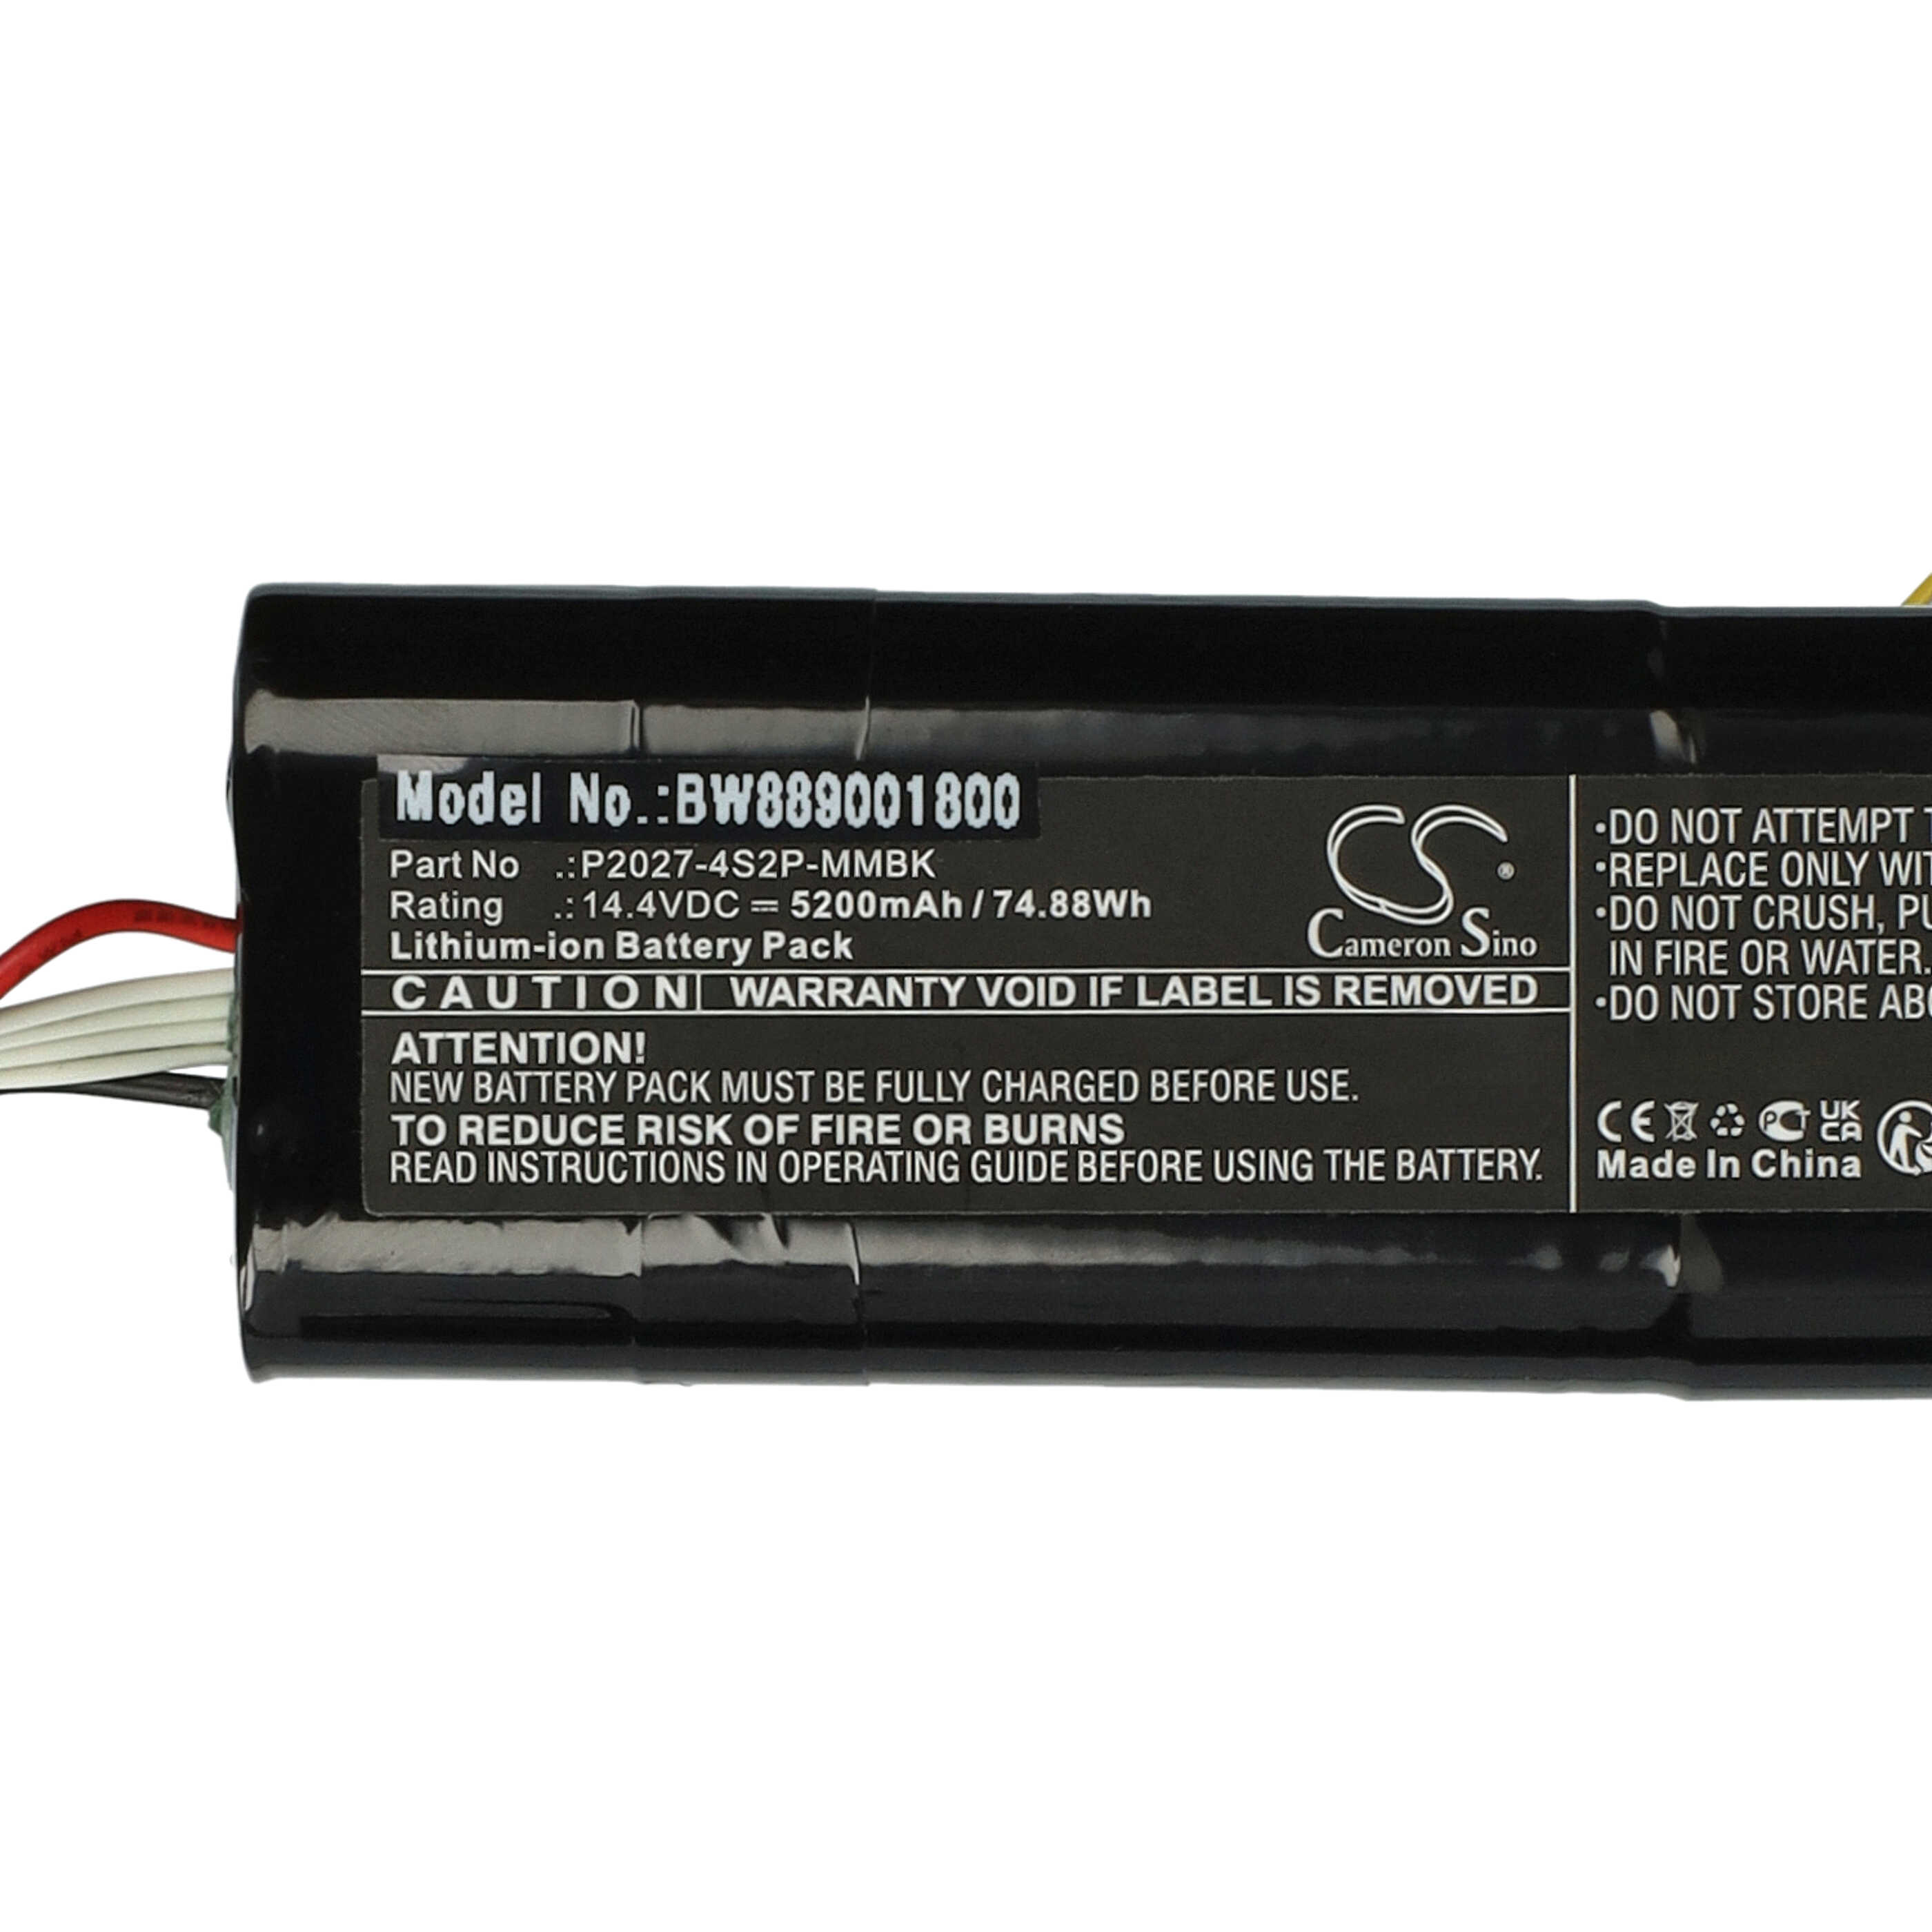 Battery Replacement for Xiaomi P2027-4S2P-MMBK for - 5200mAh, 14.4V, Li-Ion